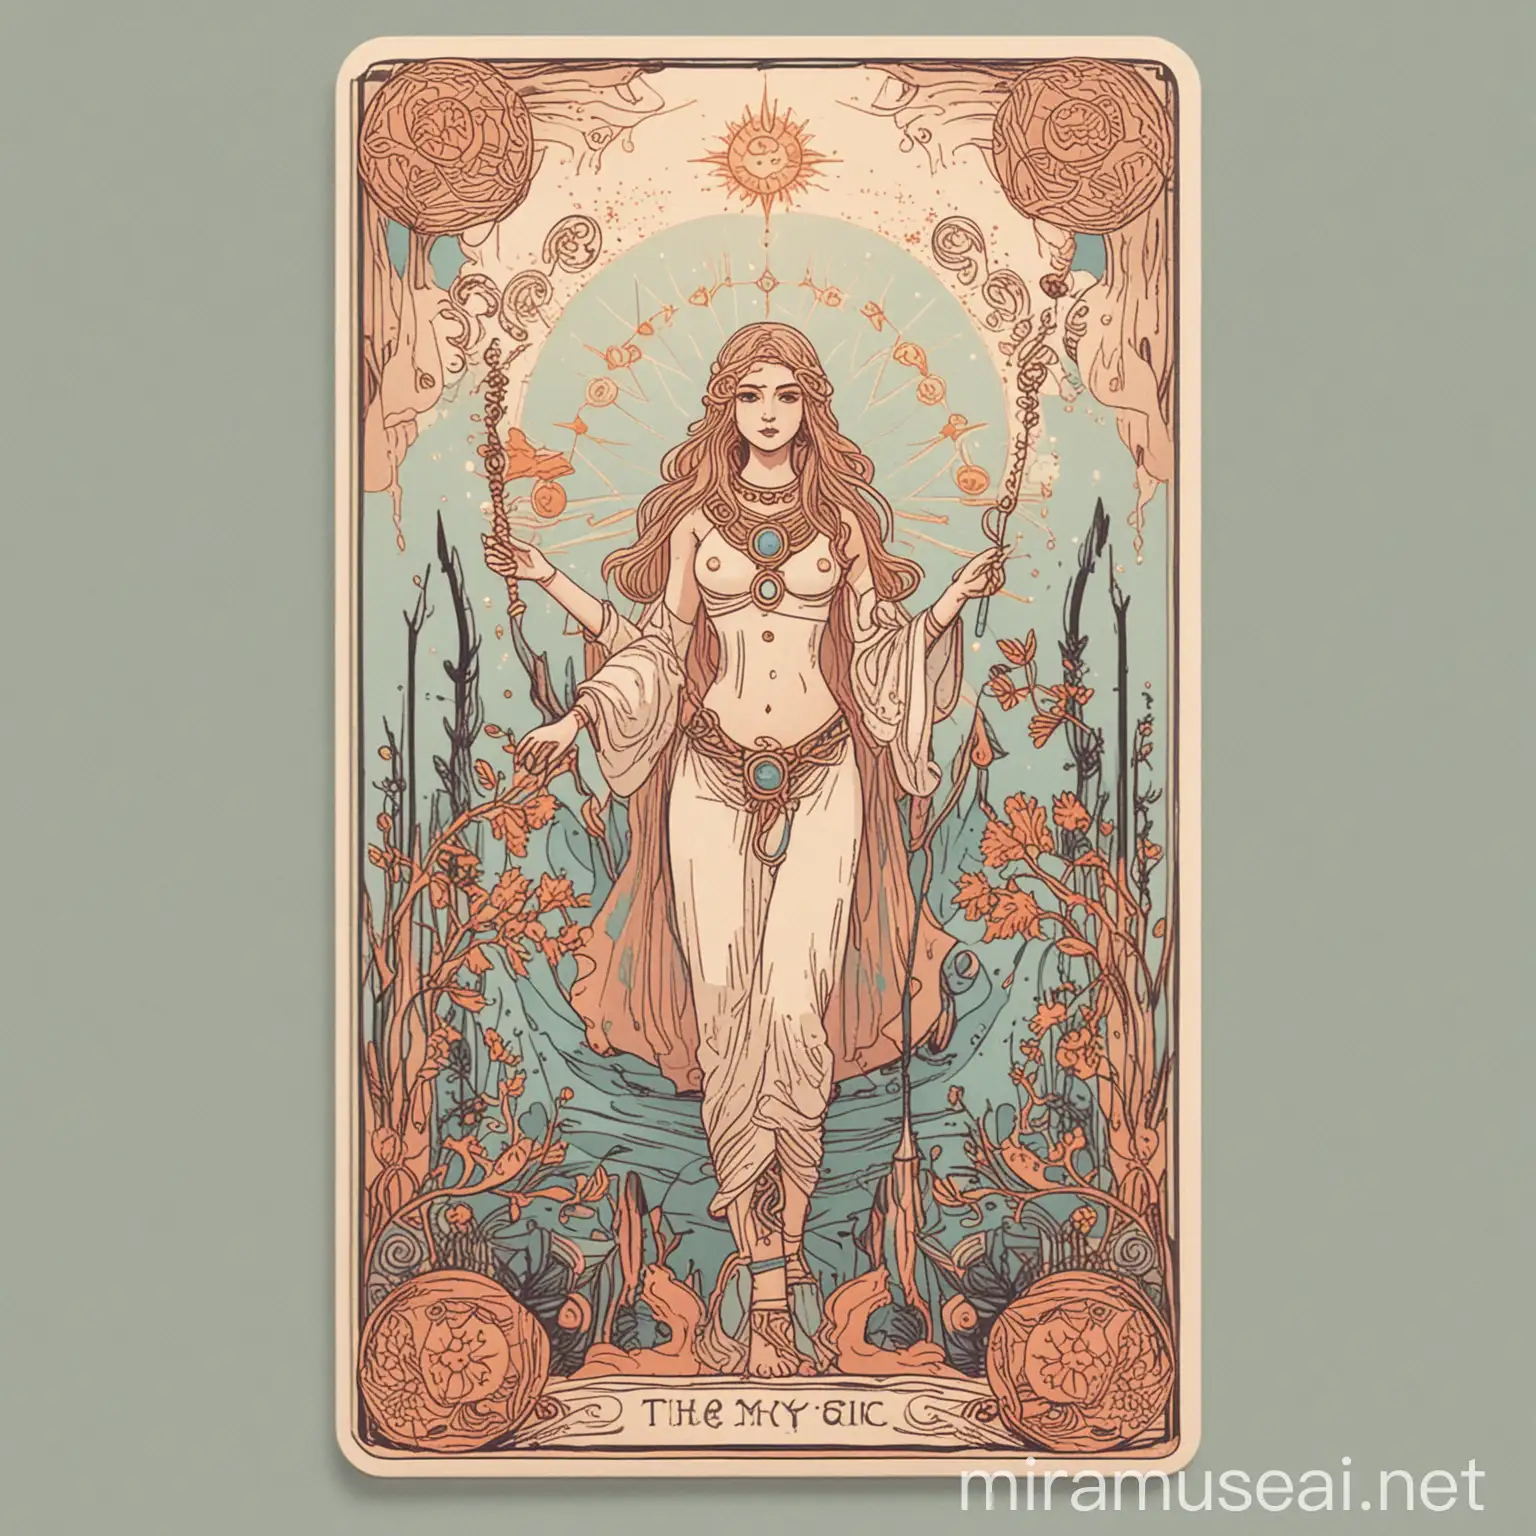 Similar to a Tarot Card, design an minimalist illustration with soft color for the archetype "the mystic" here the keywords to the character. BEYOND MAYA - OCCULT KNOWLEDGE - GREAT MYSTERY.  Avoid 3d, anime and carton like design